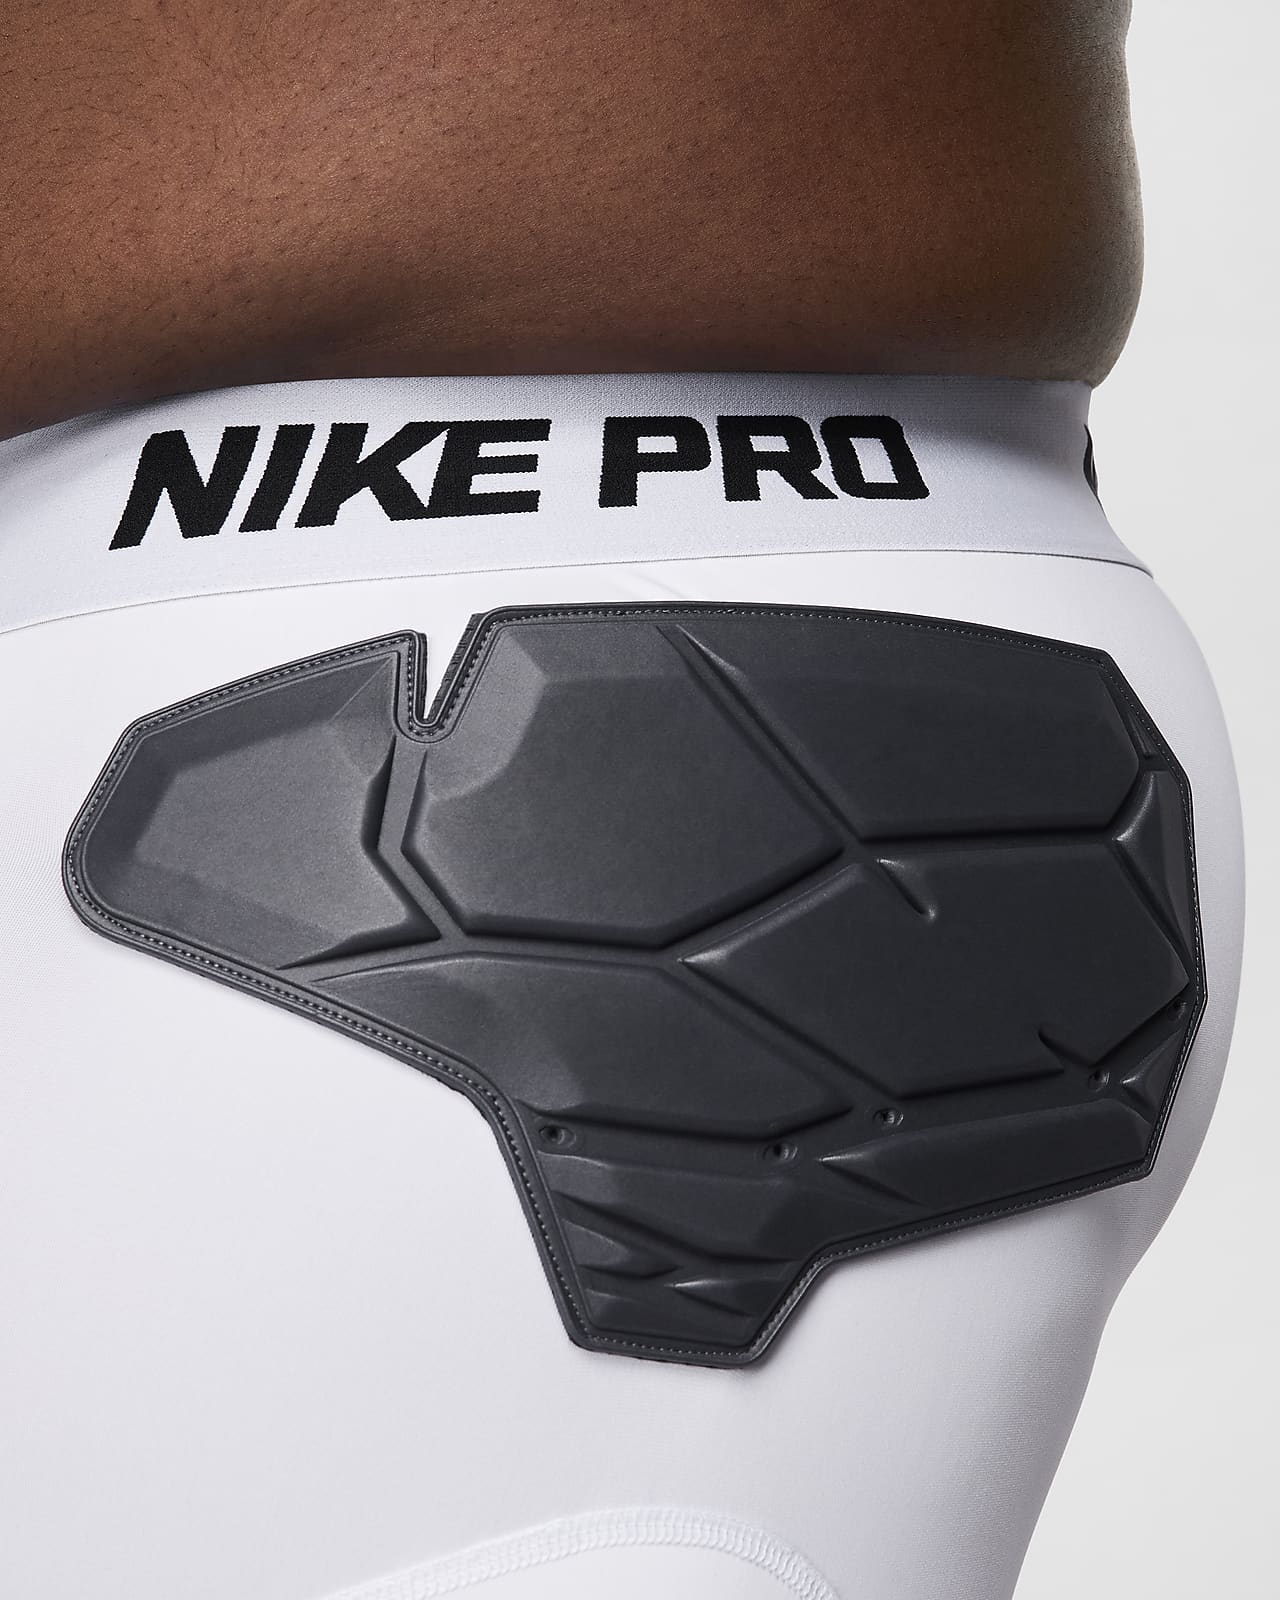 NIKE NBA PRO HYPERSTRONG 3/4 BASKETBALL COMPRESSION TIGHTS WHITE